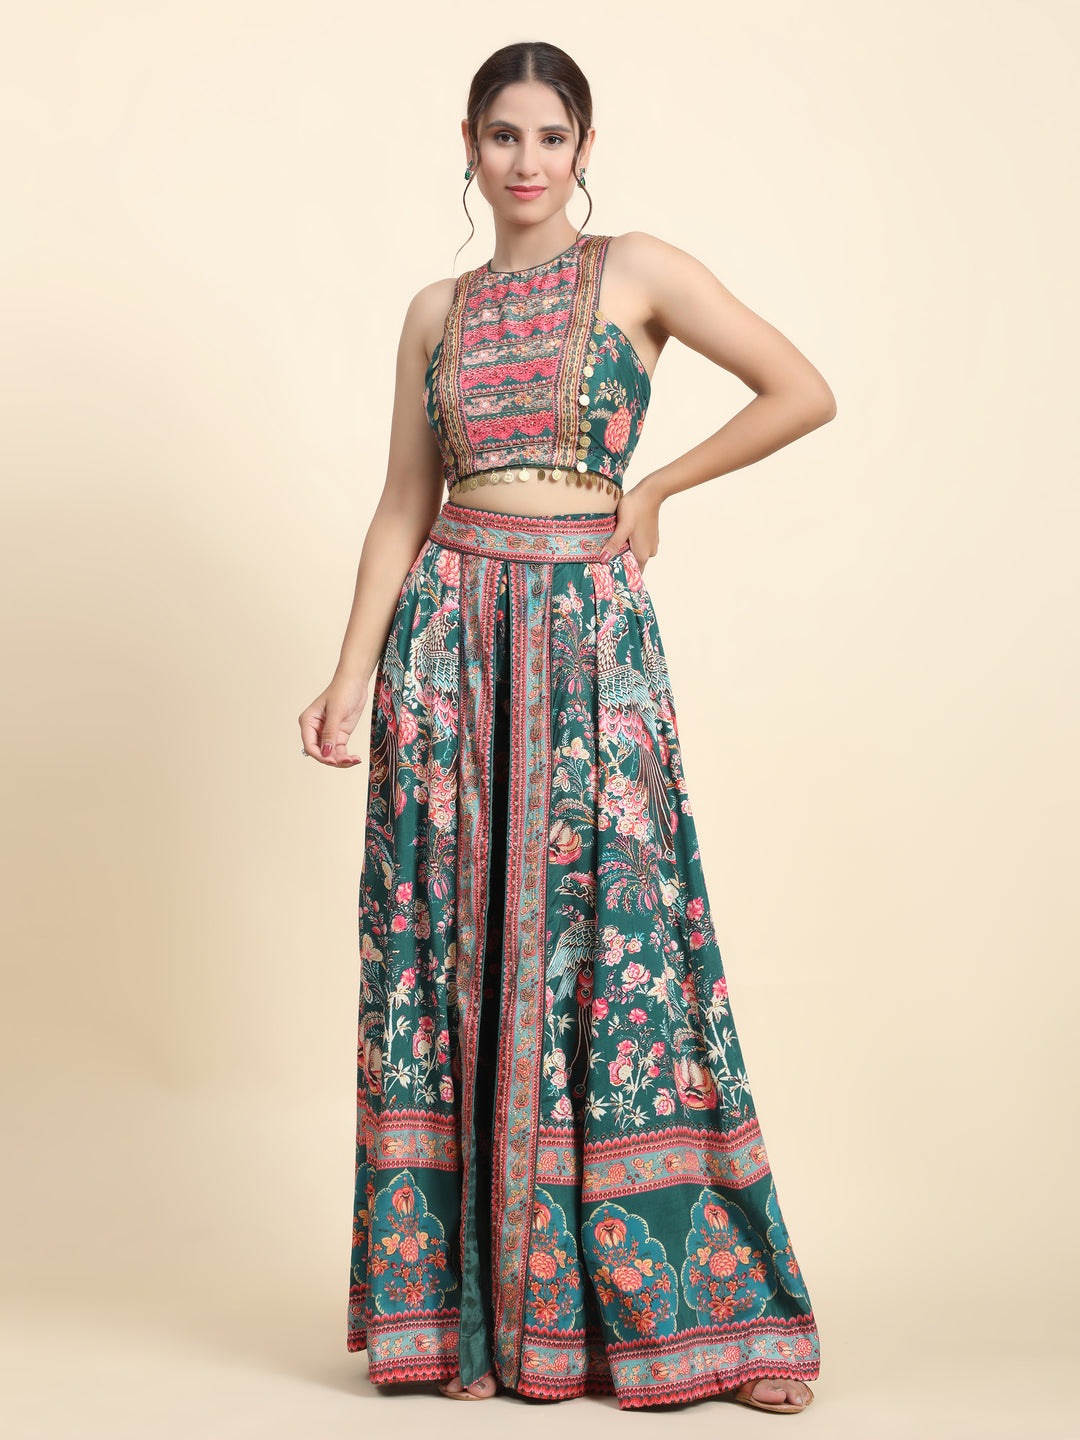 GREEN PRINTED TRENDY SKIRT PALLAZO AND CROP TOP - RENT